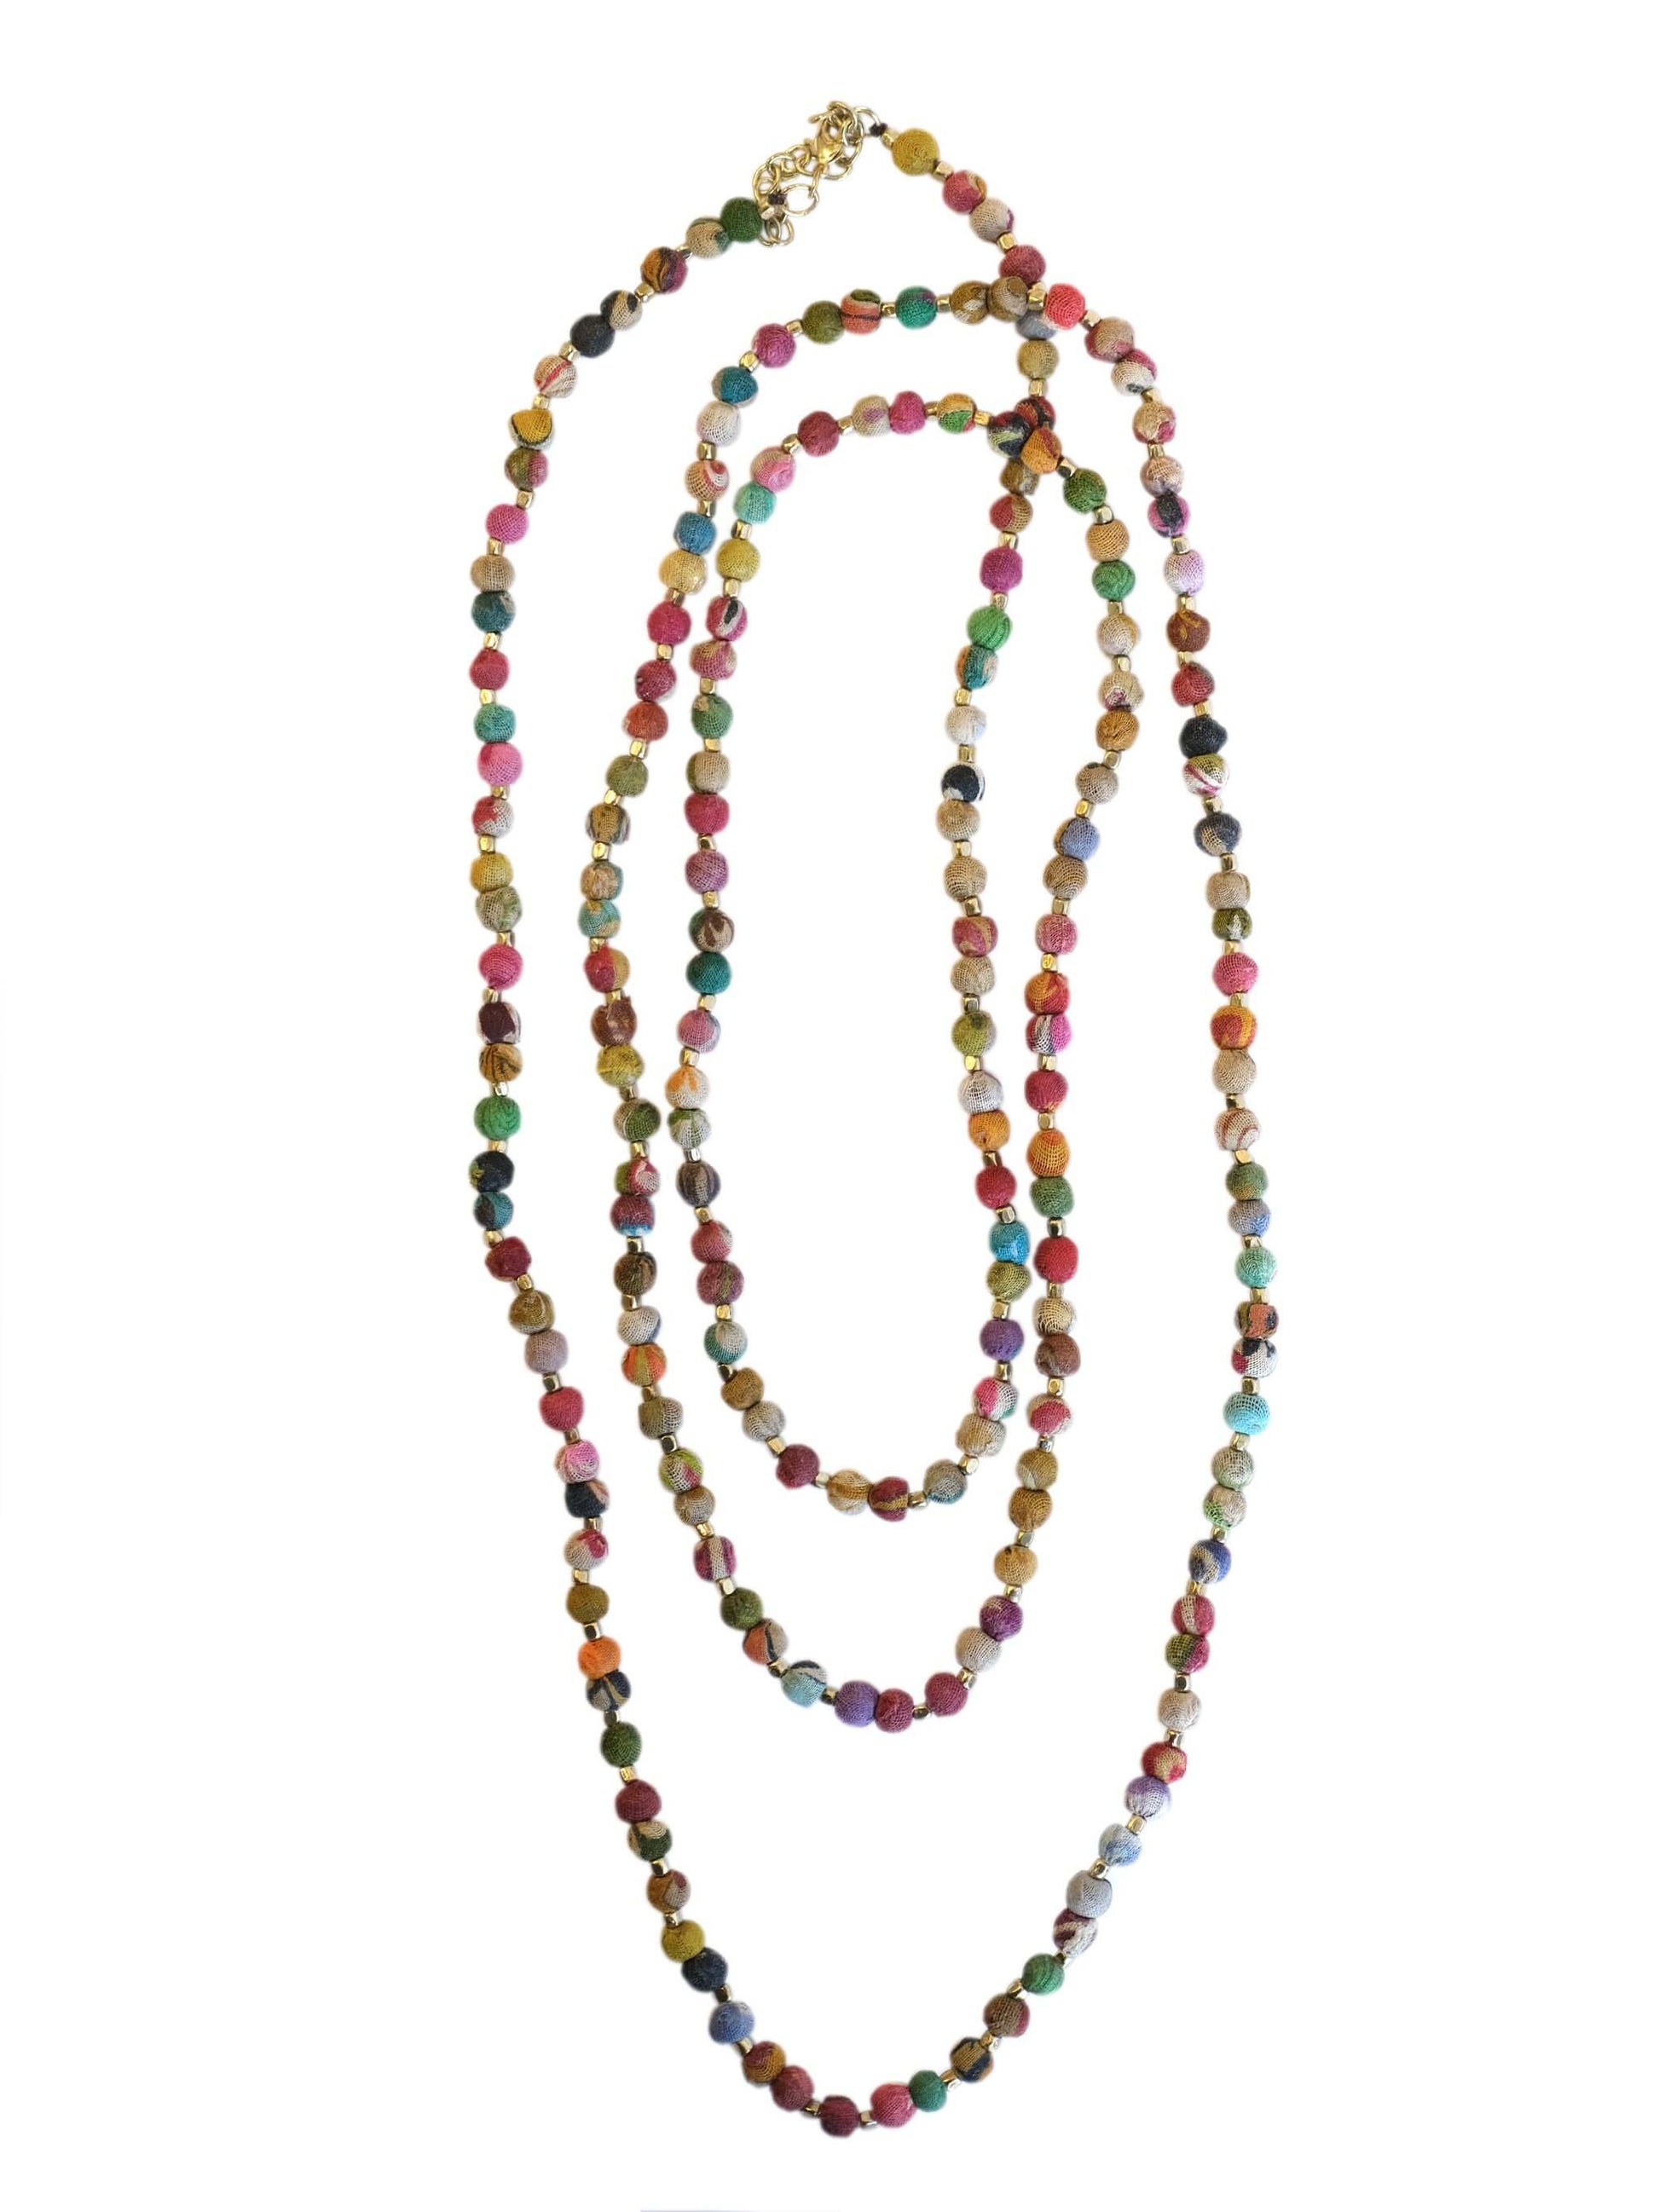 Hand-Crafted Colourful Necklace Shiva - Shop Charlies Interiors